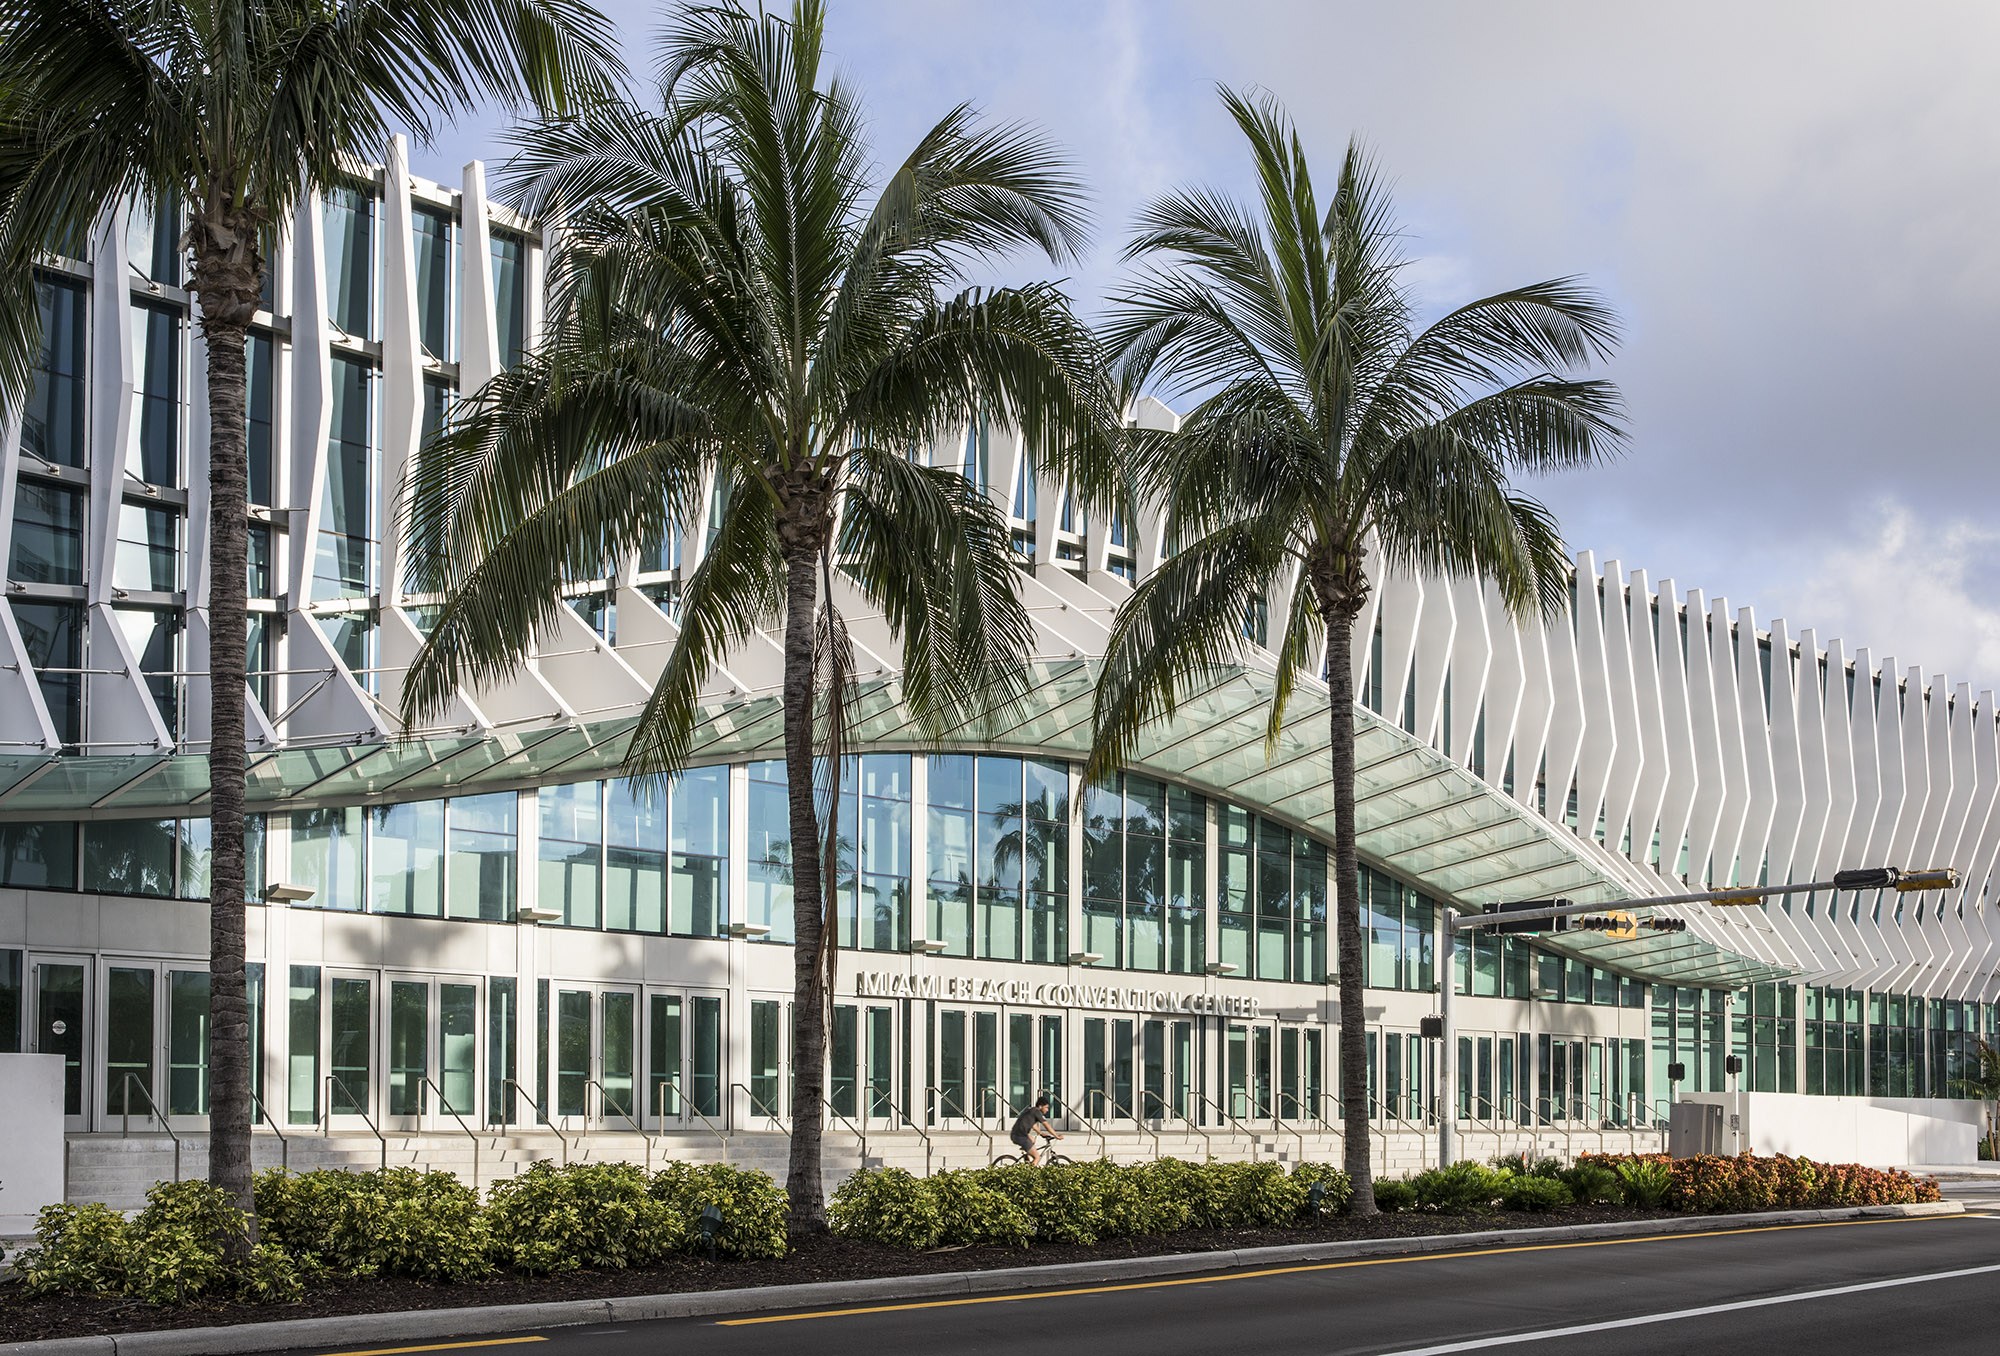 Here’s a first look at the Miami Beach Convention Center